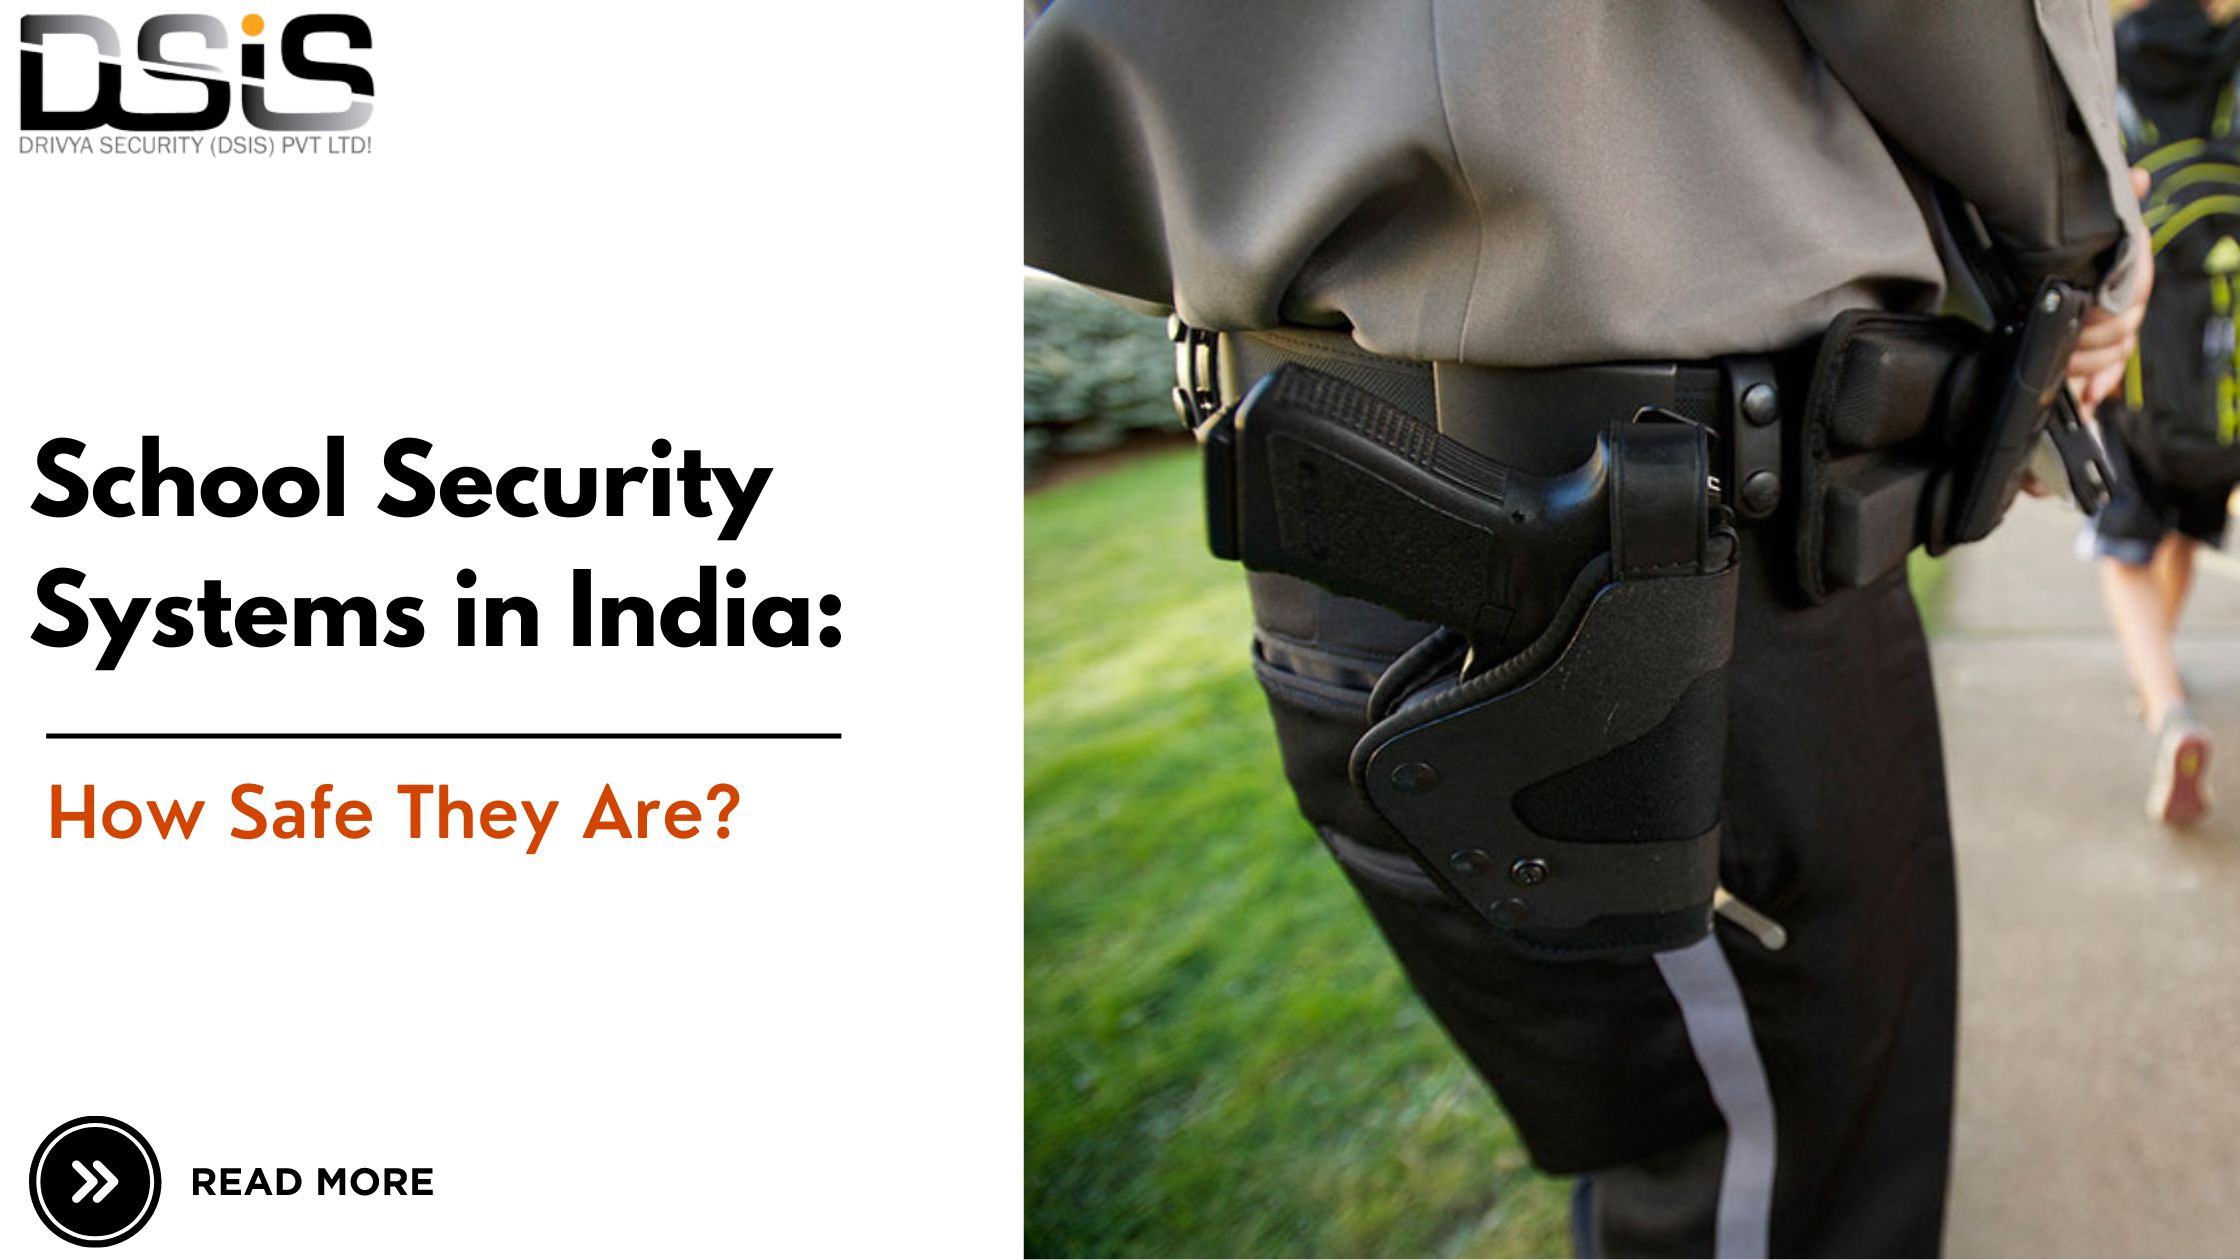 How Safe is the School Security System in India? How to Manage it?